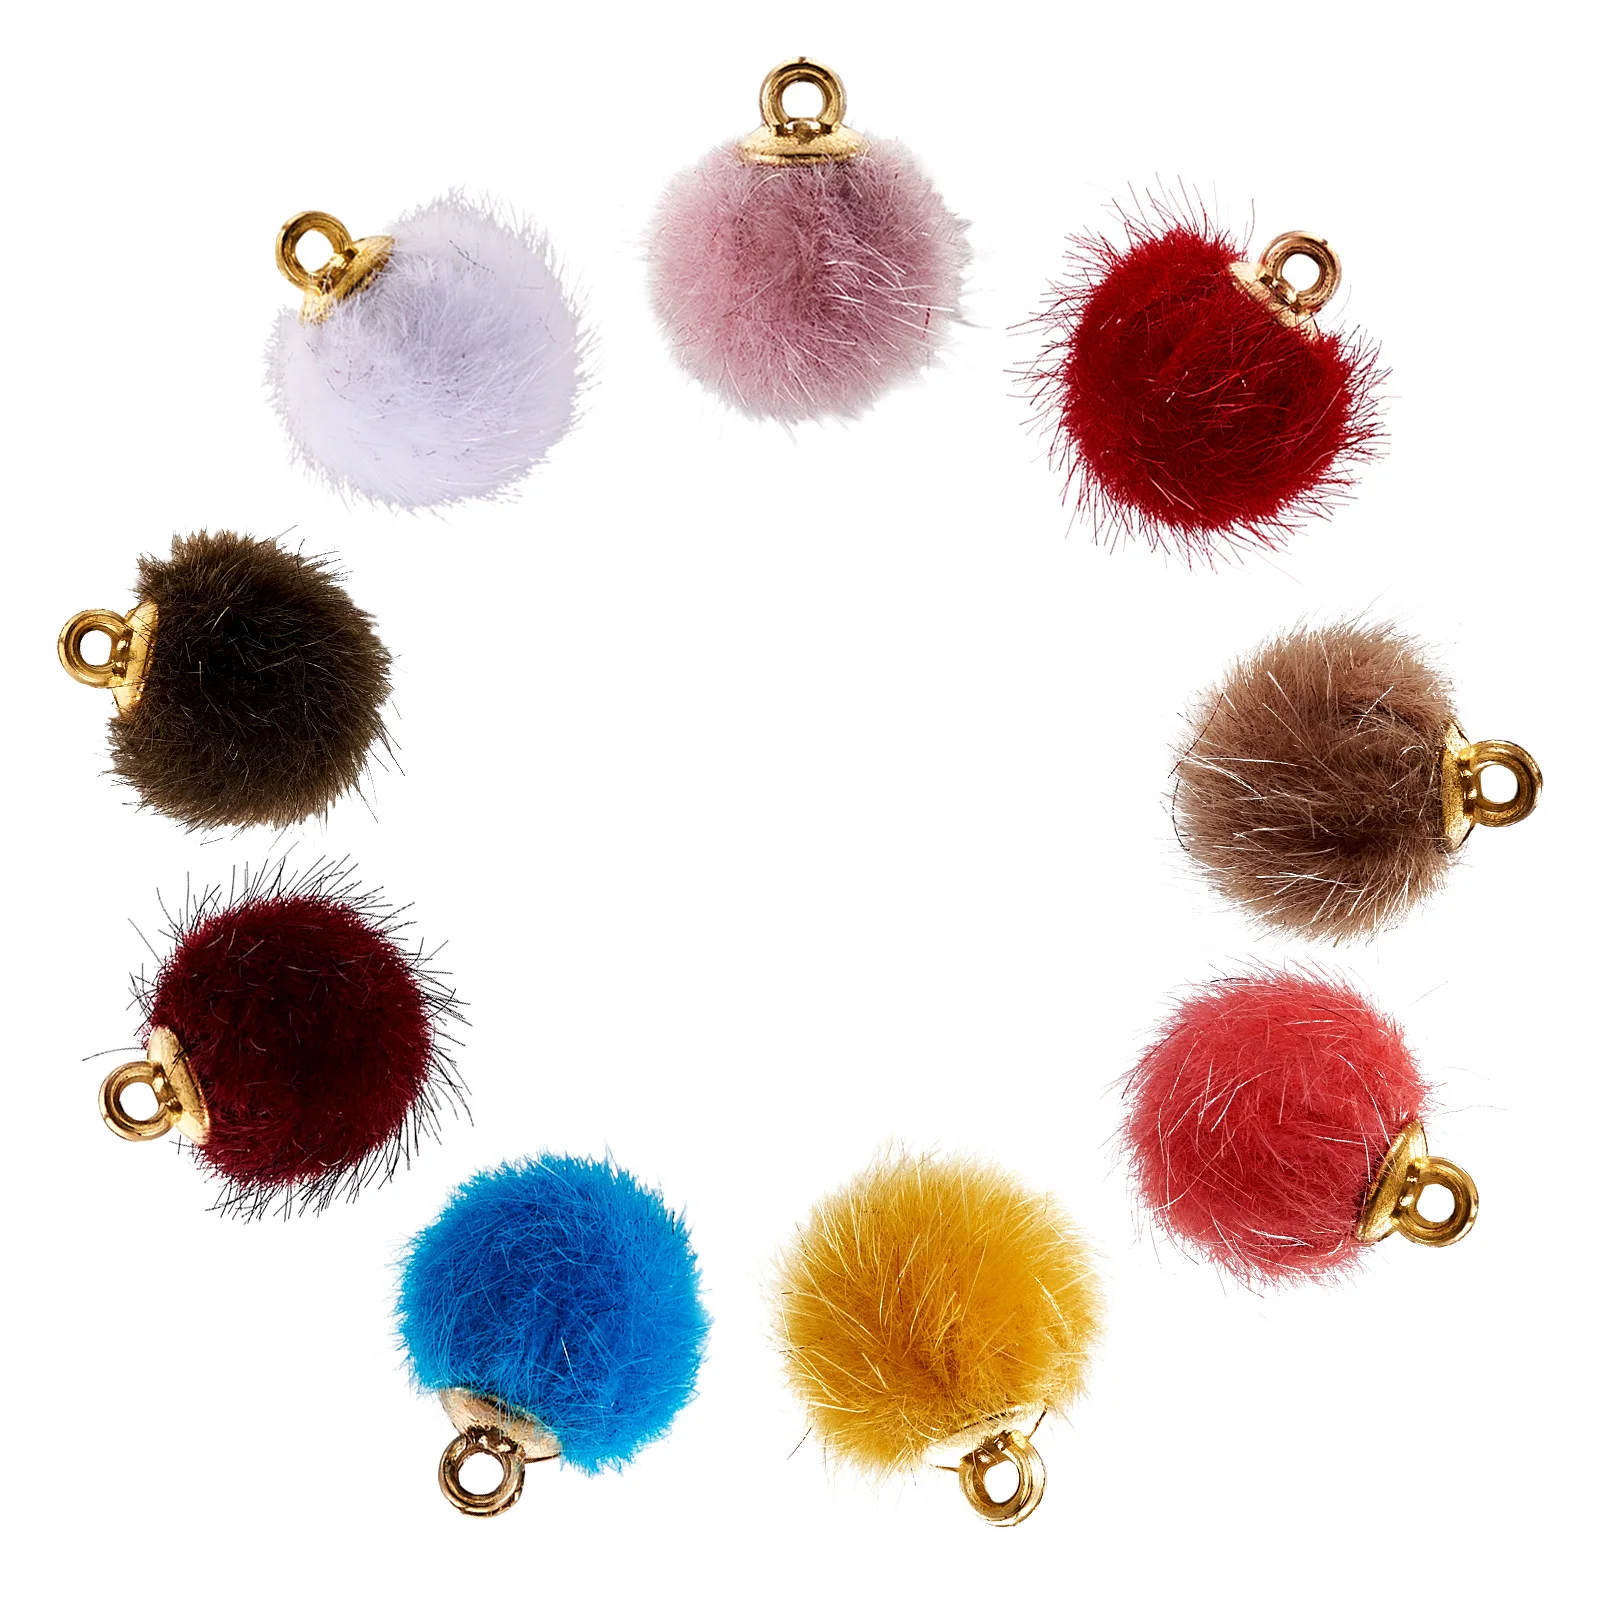 

50Pcs Mixed Colors Plush Fur Covered Pompom Ball Pendants Charms For Bracelet Earring Pendant Necklace DIY Jewelry Making